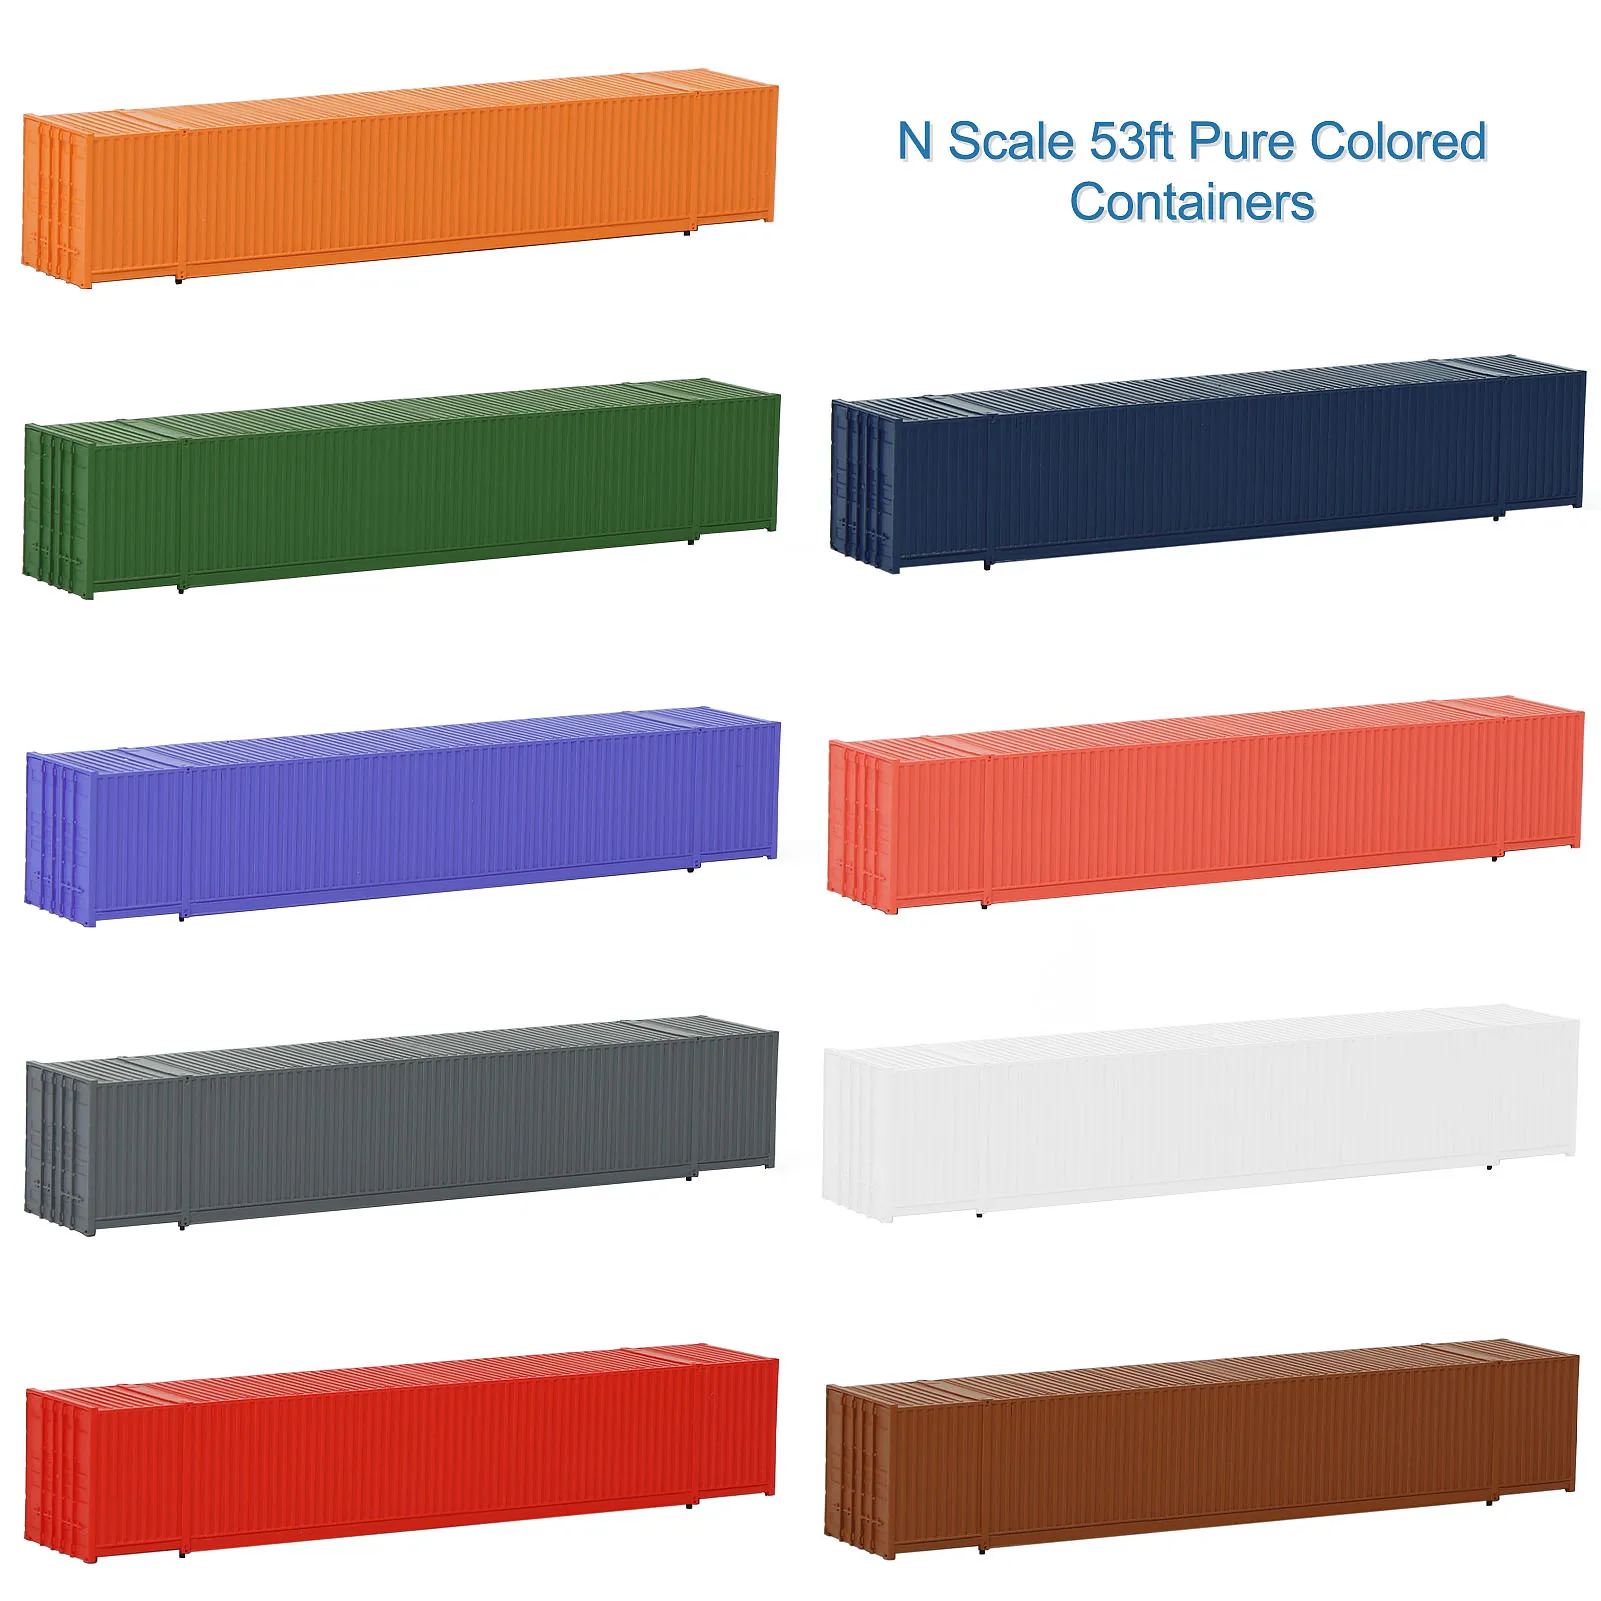 

9pcs Model Railway N Scale 53' 1:160 53ft Blank Shipping Container Pure Color Ribbed Side Cargo Box C15009